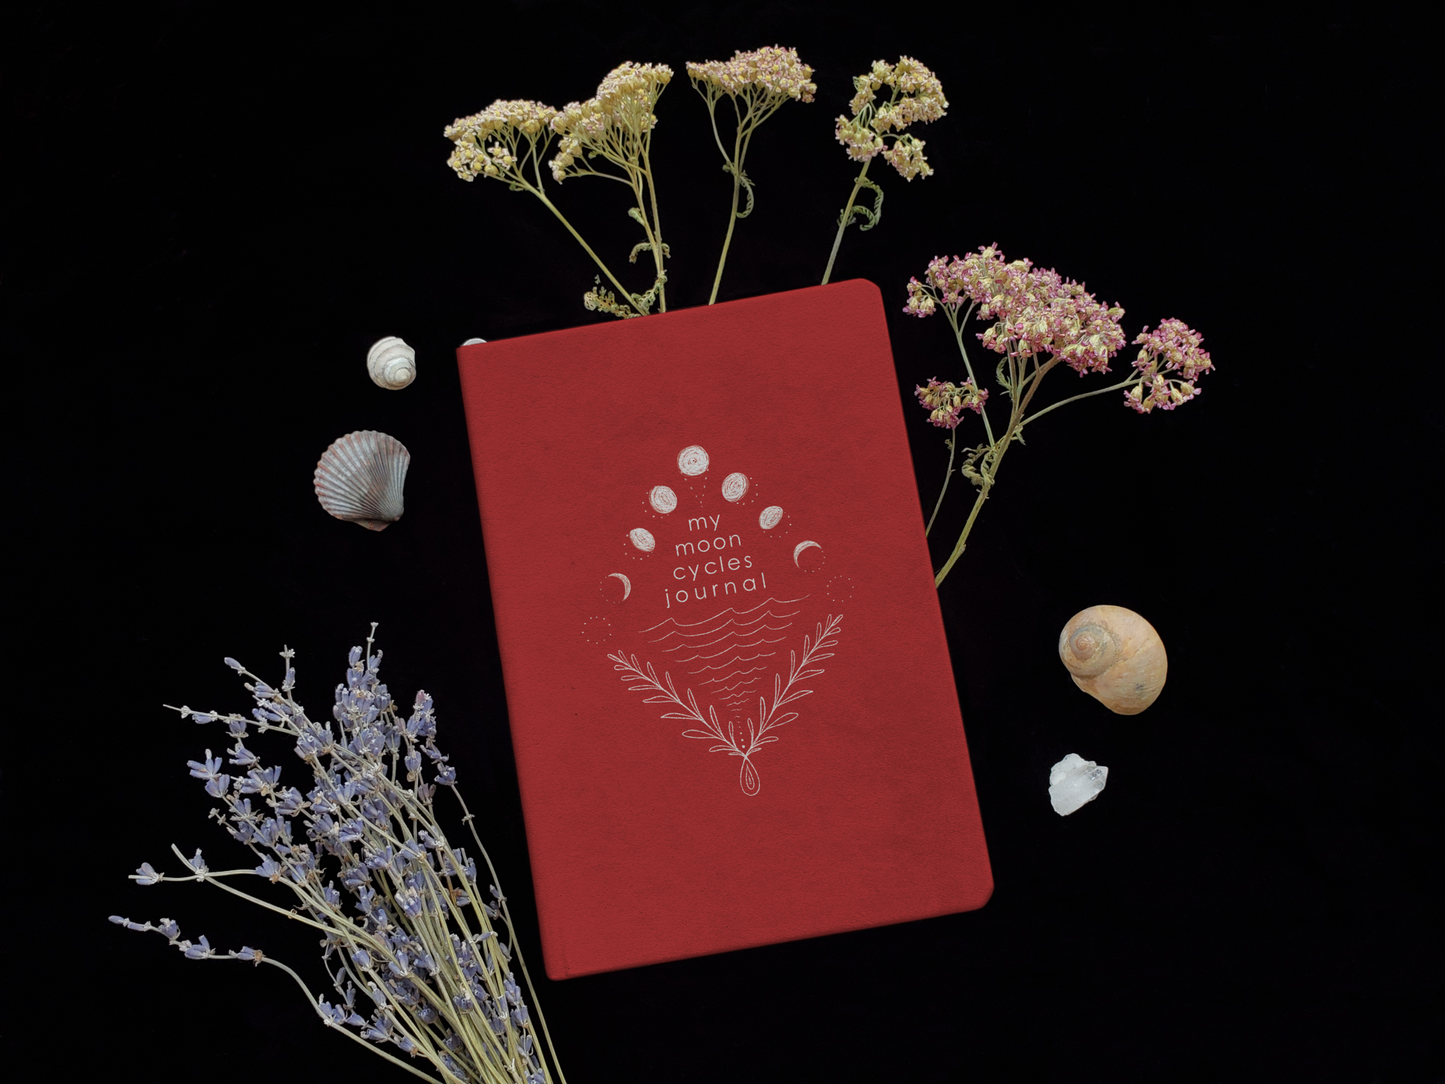 My Moon Cycles Journal: A Menstrual Tracking Journal for Youth